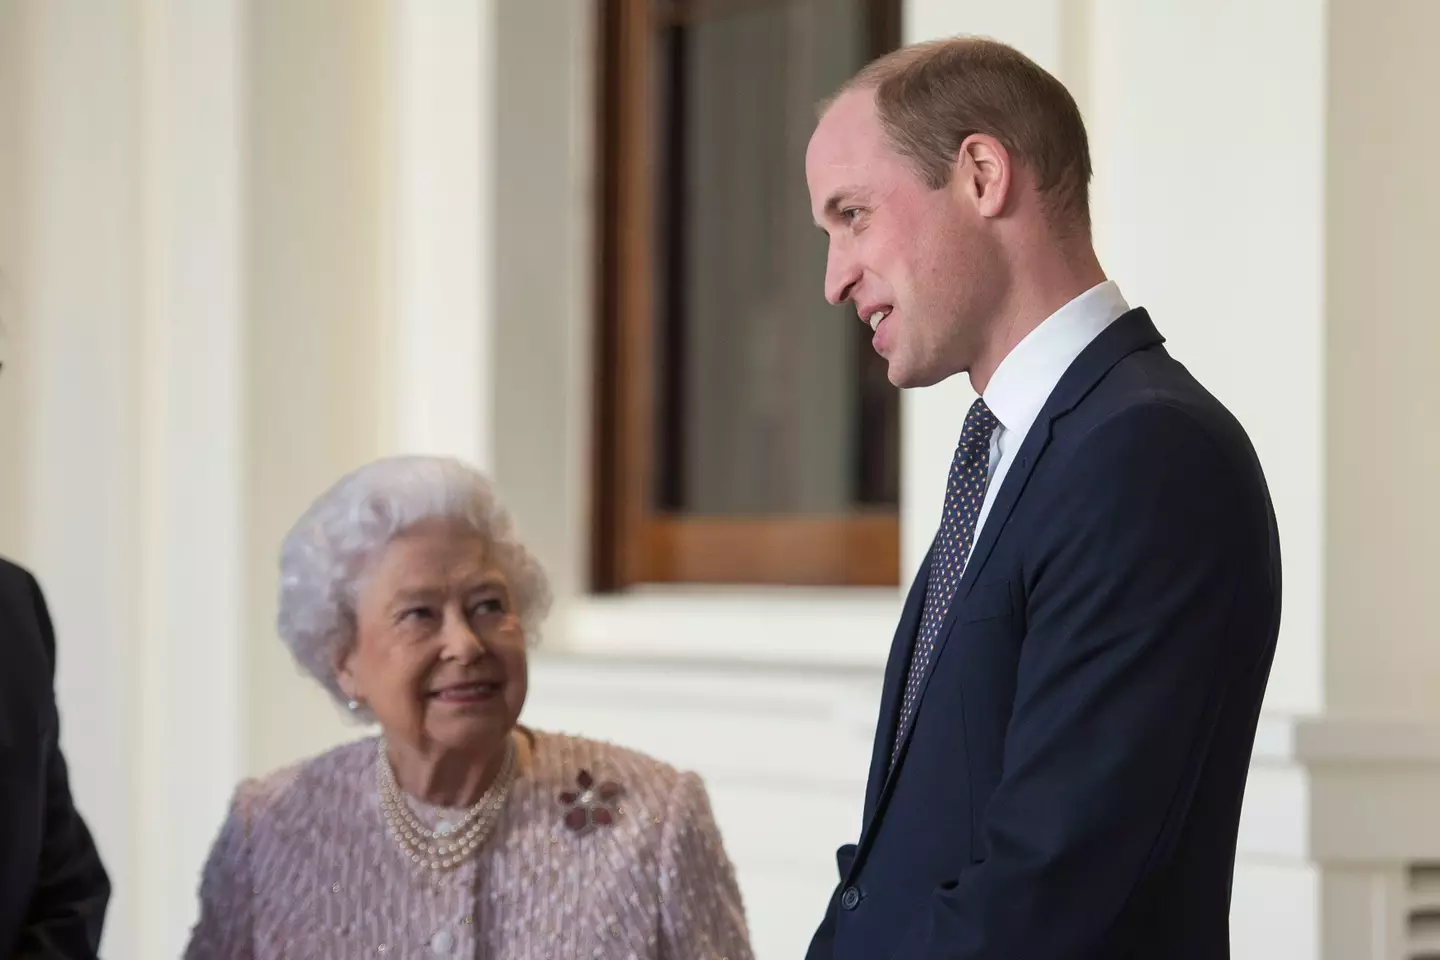 Prince William thanked his late grandmother in his statement.